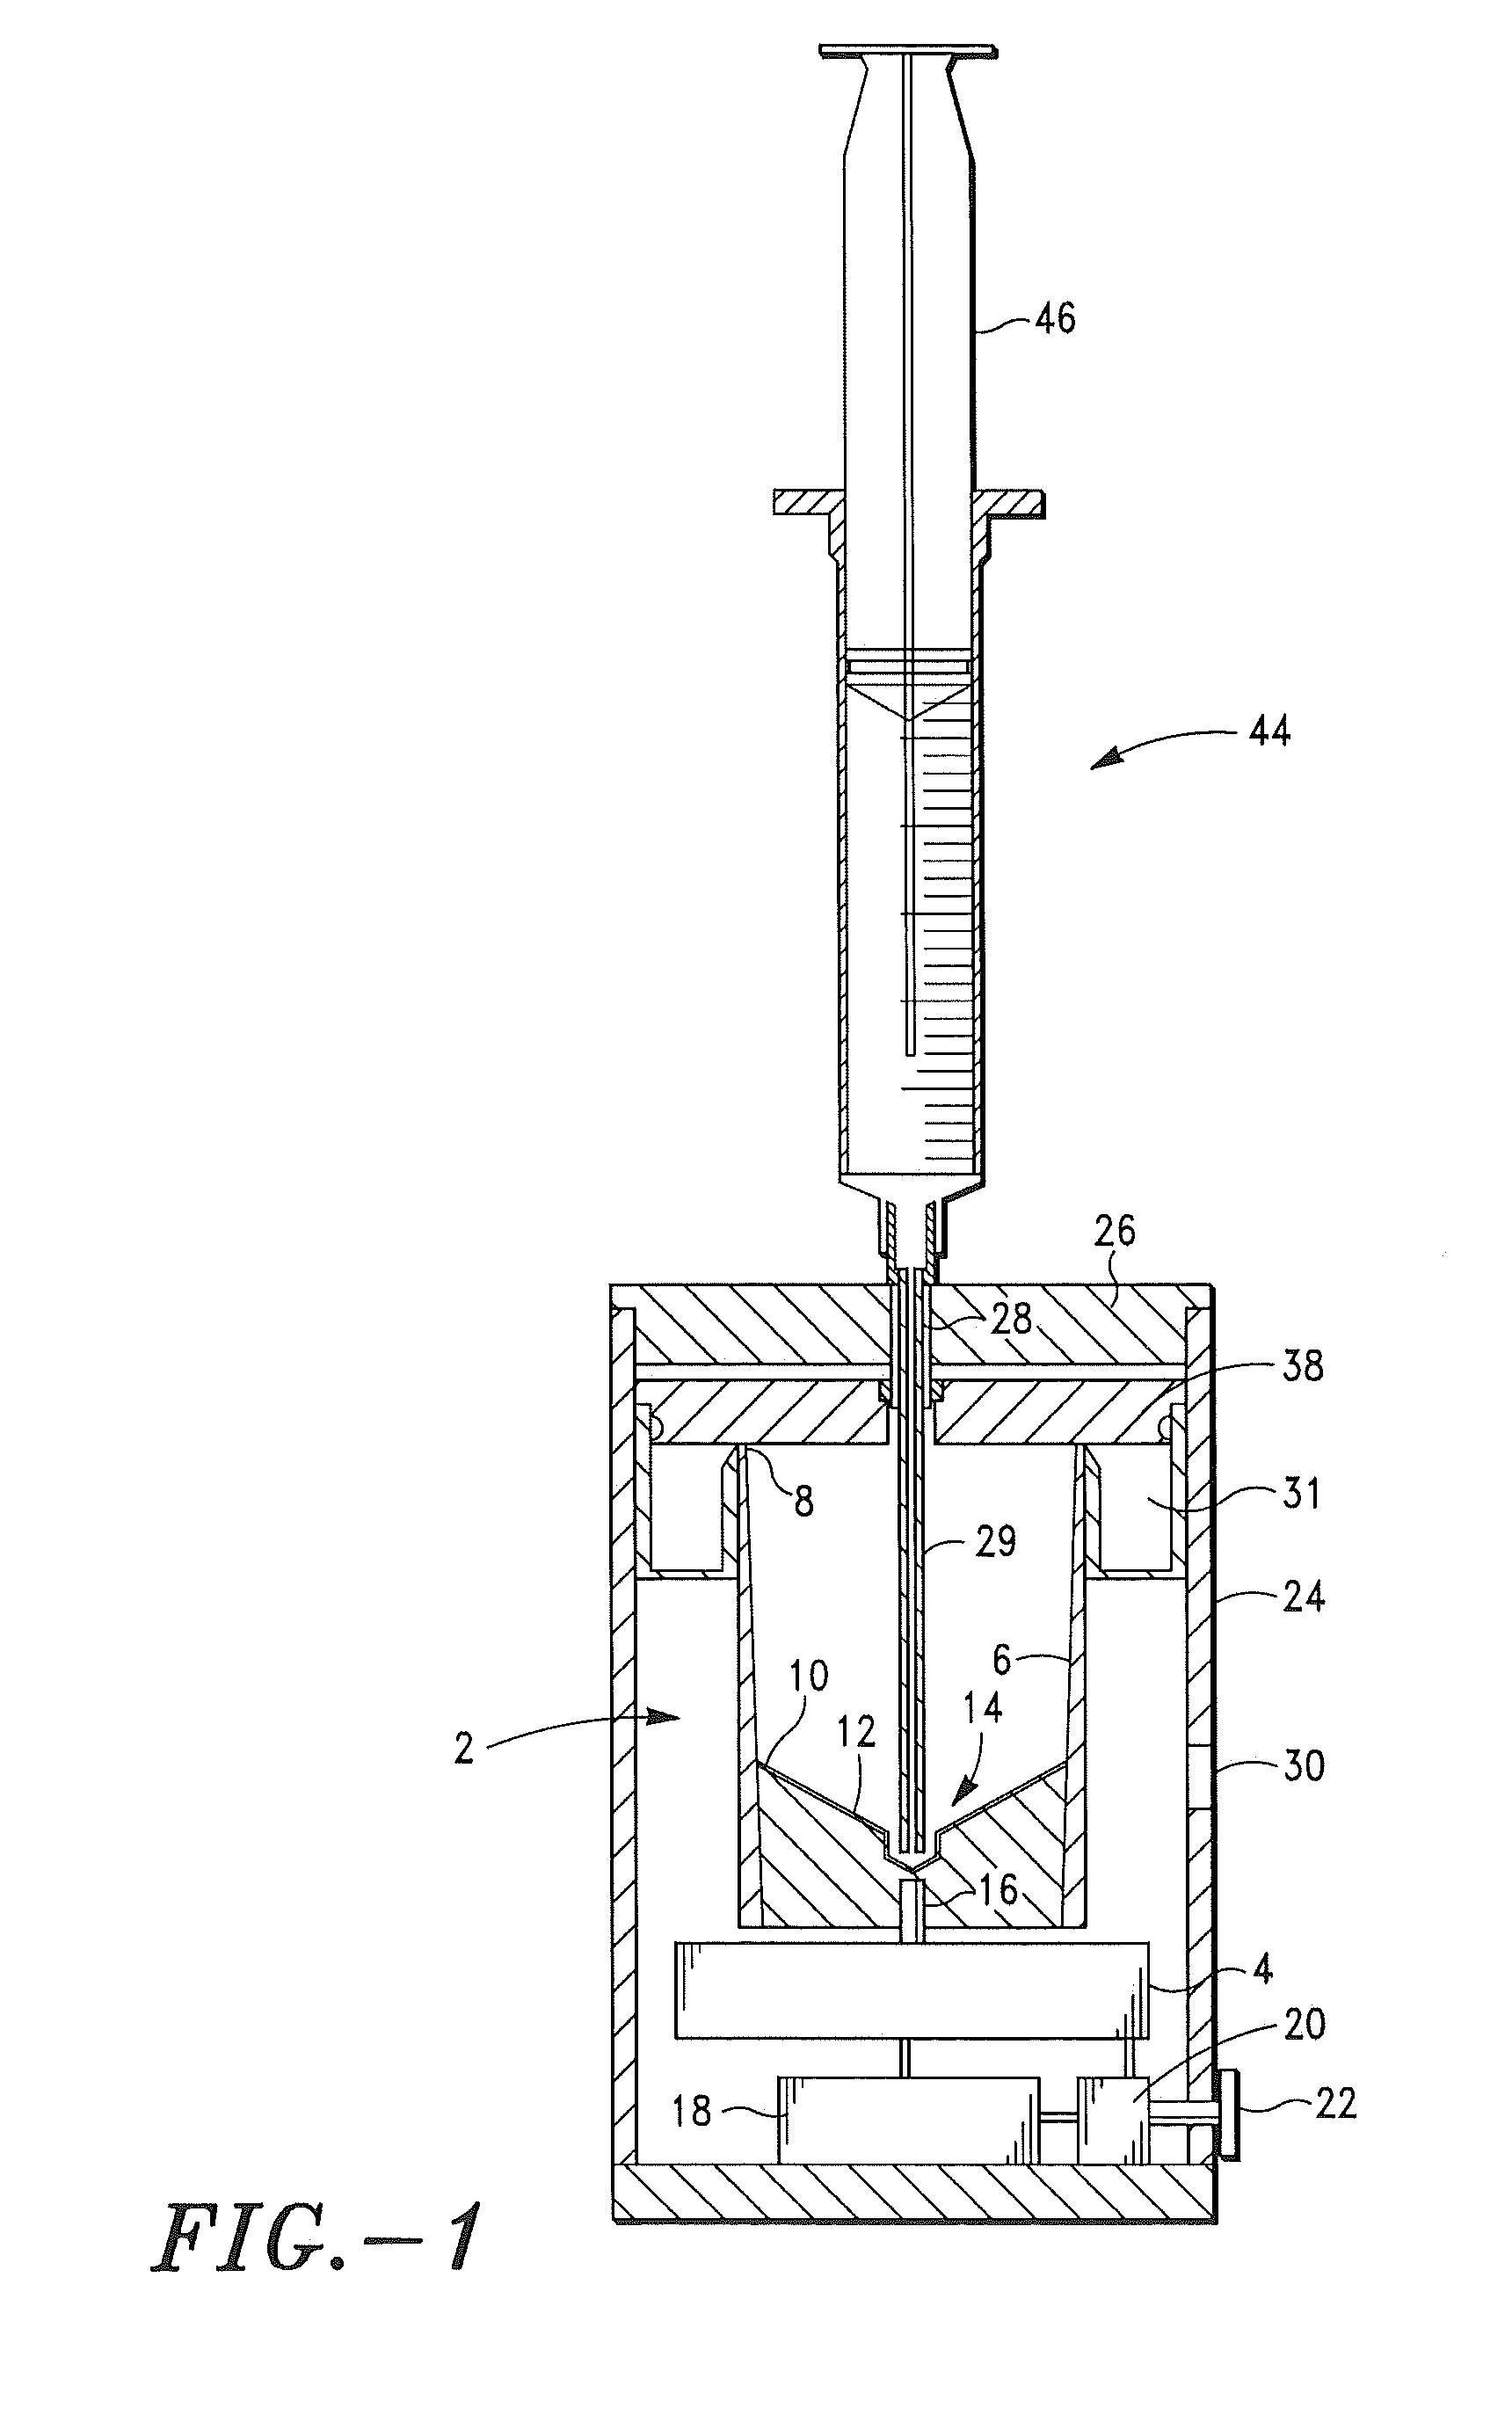 Method And Apparatus For Preparing Platelet Rich Plasma And Concentrates Thereof